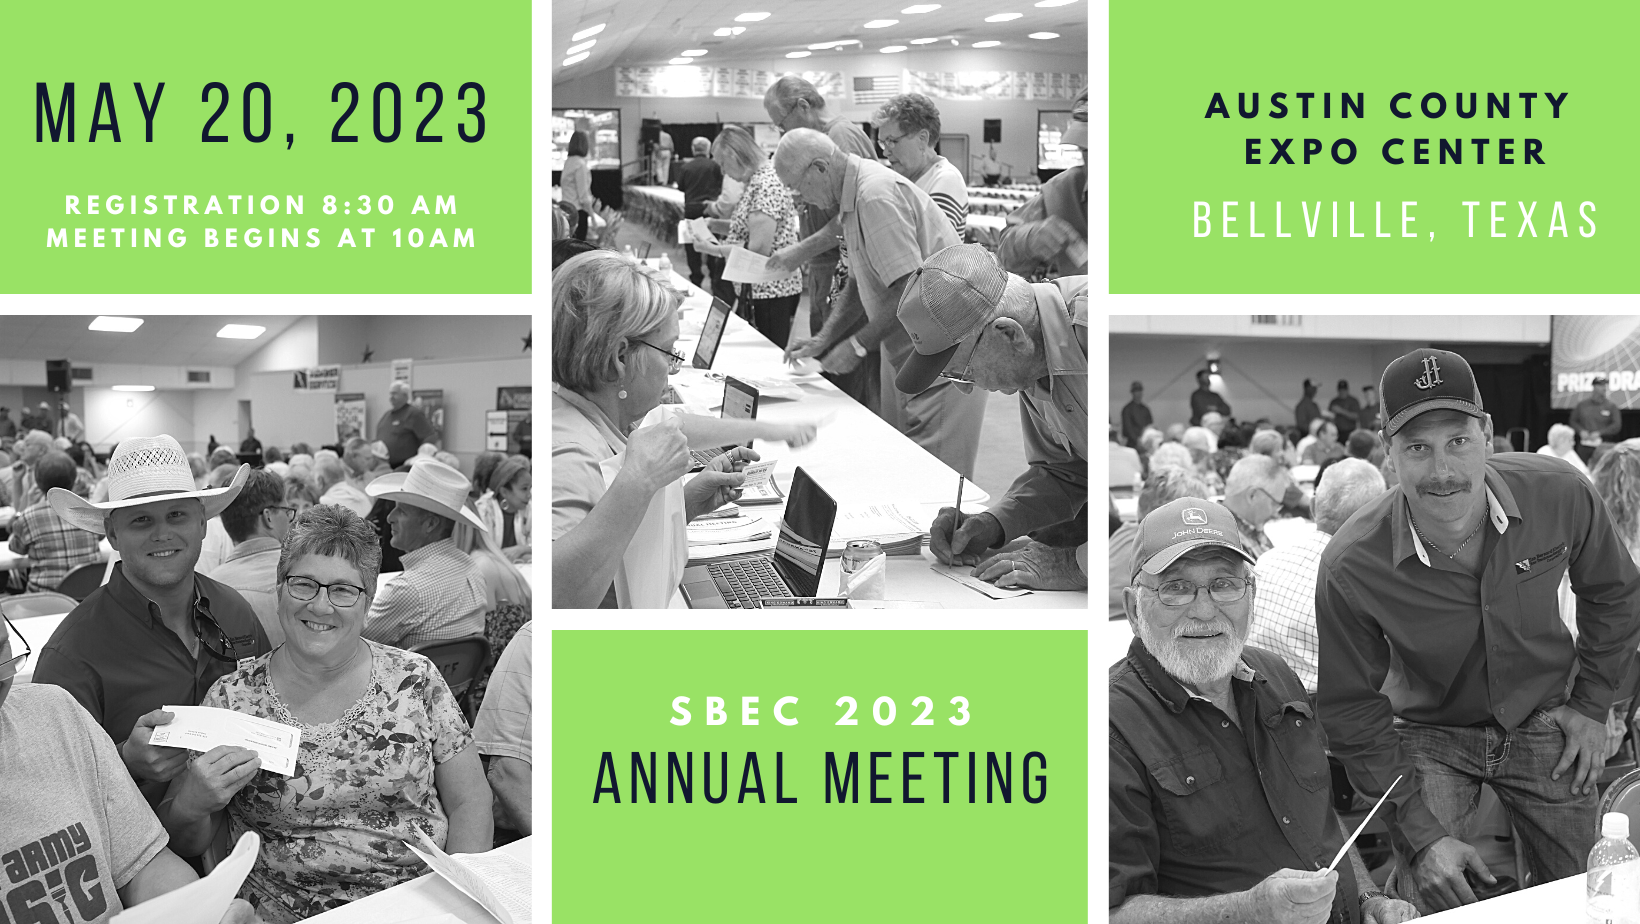 2023 Annual Meeting Date Set